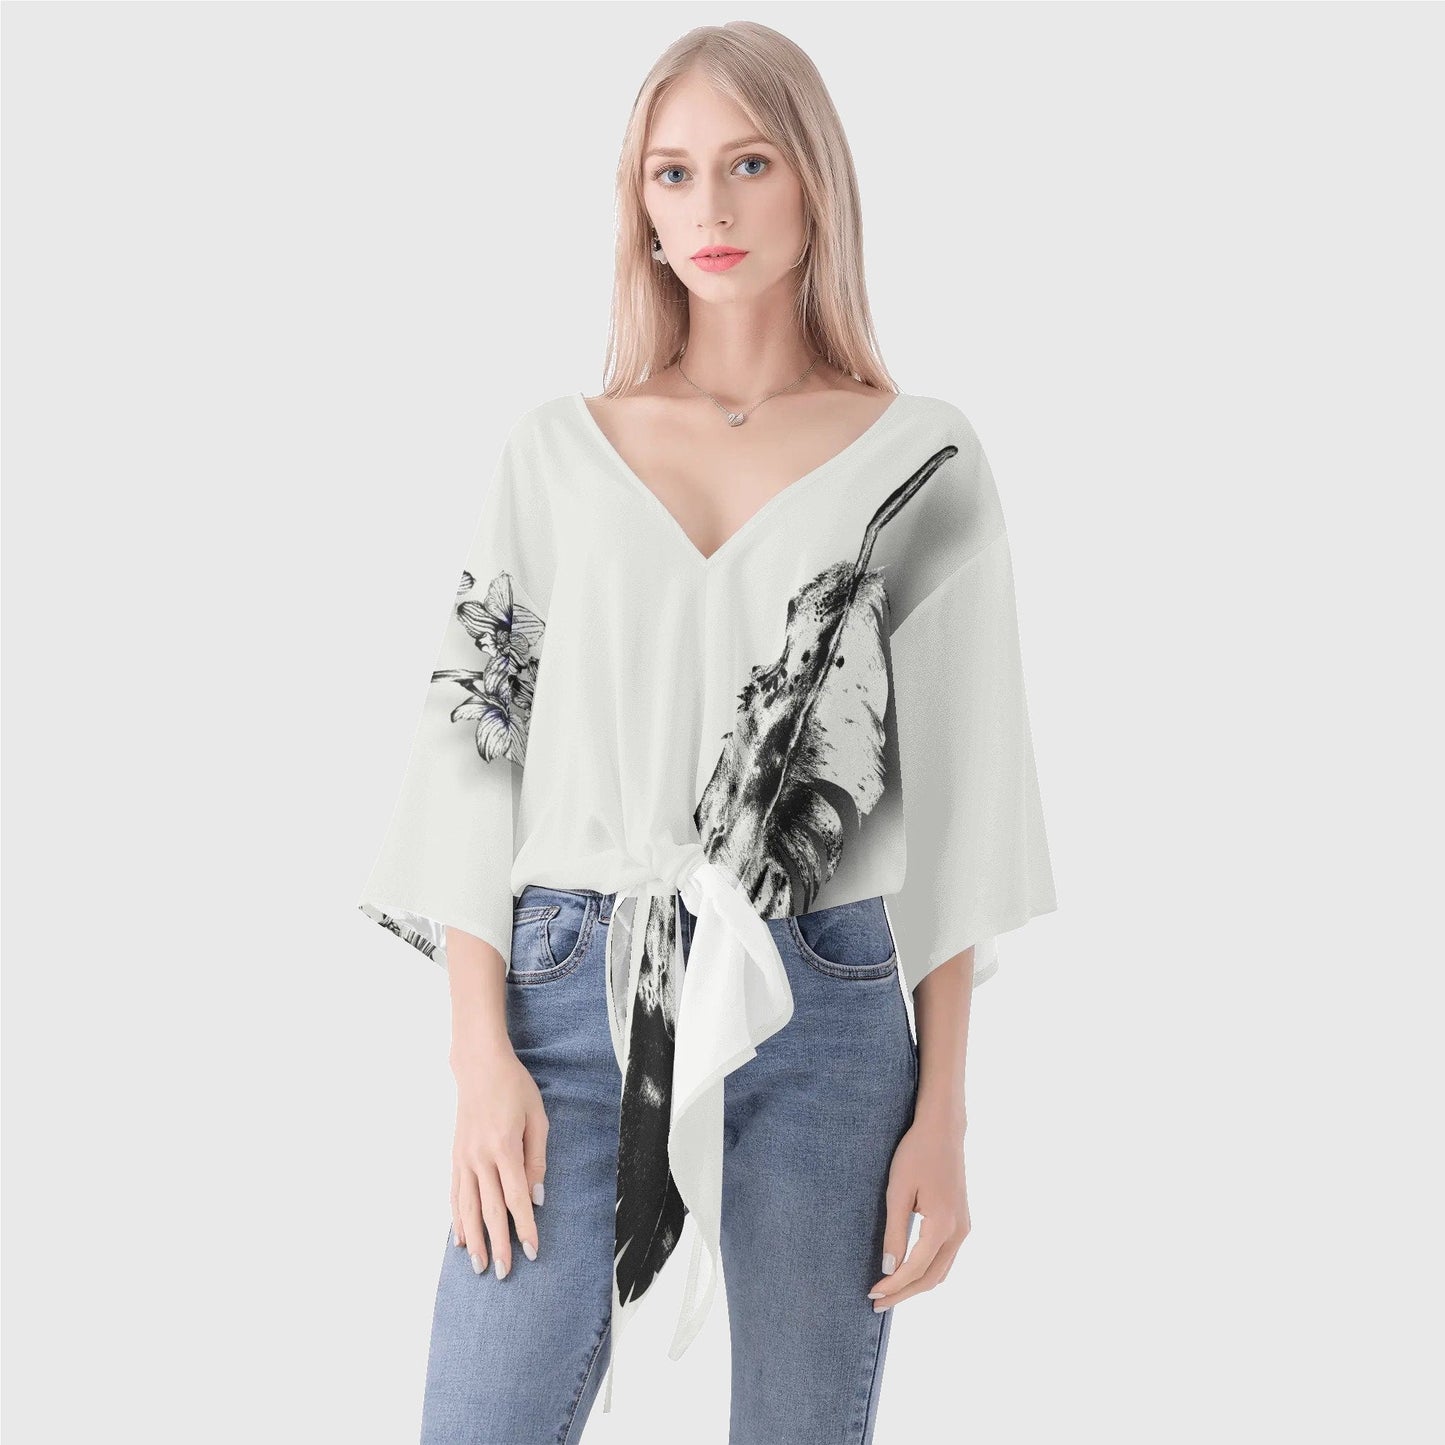 fog*grey*deep*grey*indigenous*native*american*eagle*feather*orchid*knot*blouse*women's